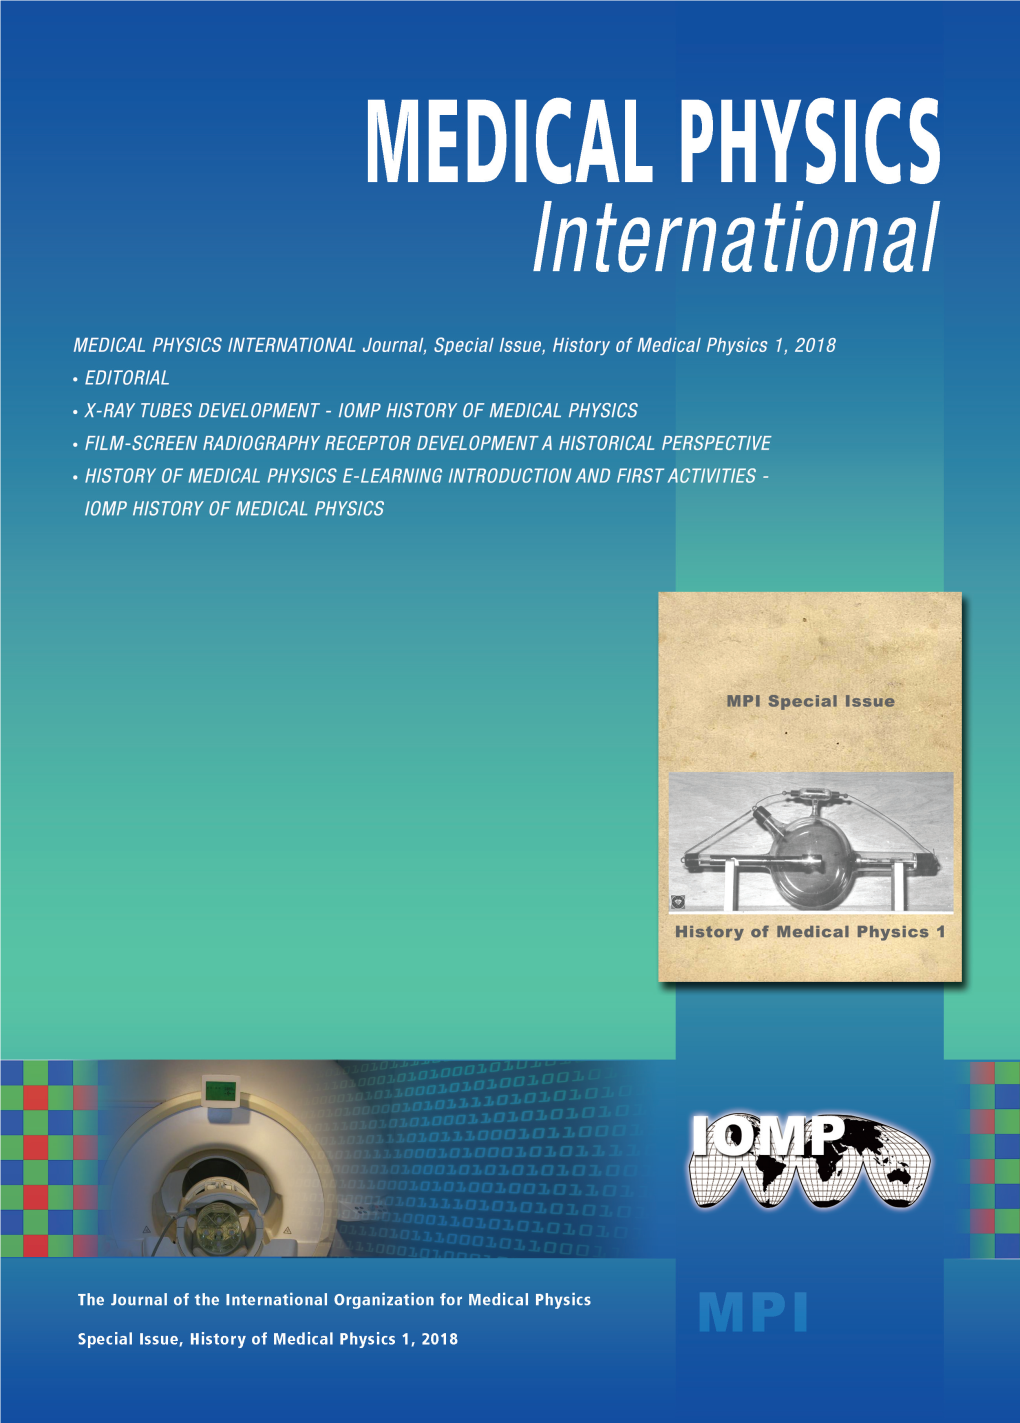 MEDICAL PHYSICS INTERNATIONAL Journal, Special Issue, History of Medical Physics 1, 2018